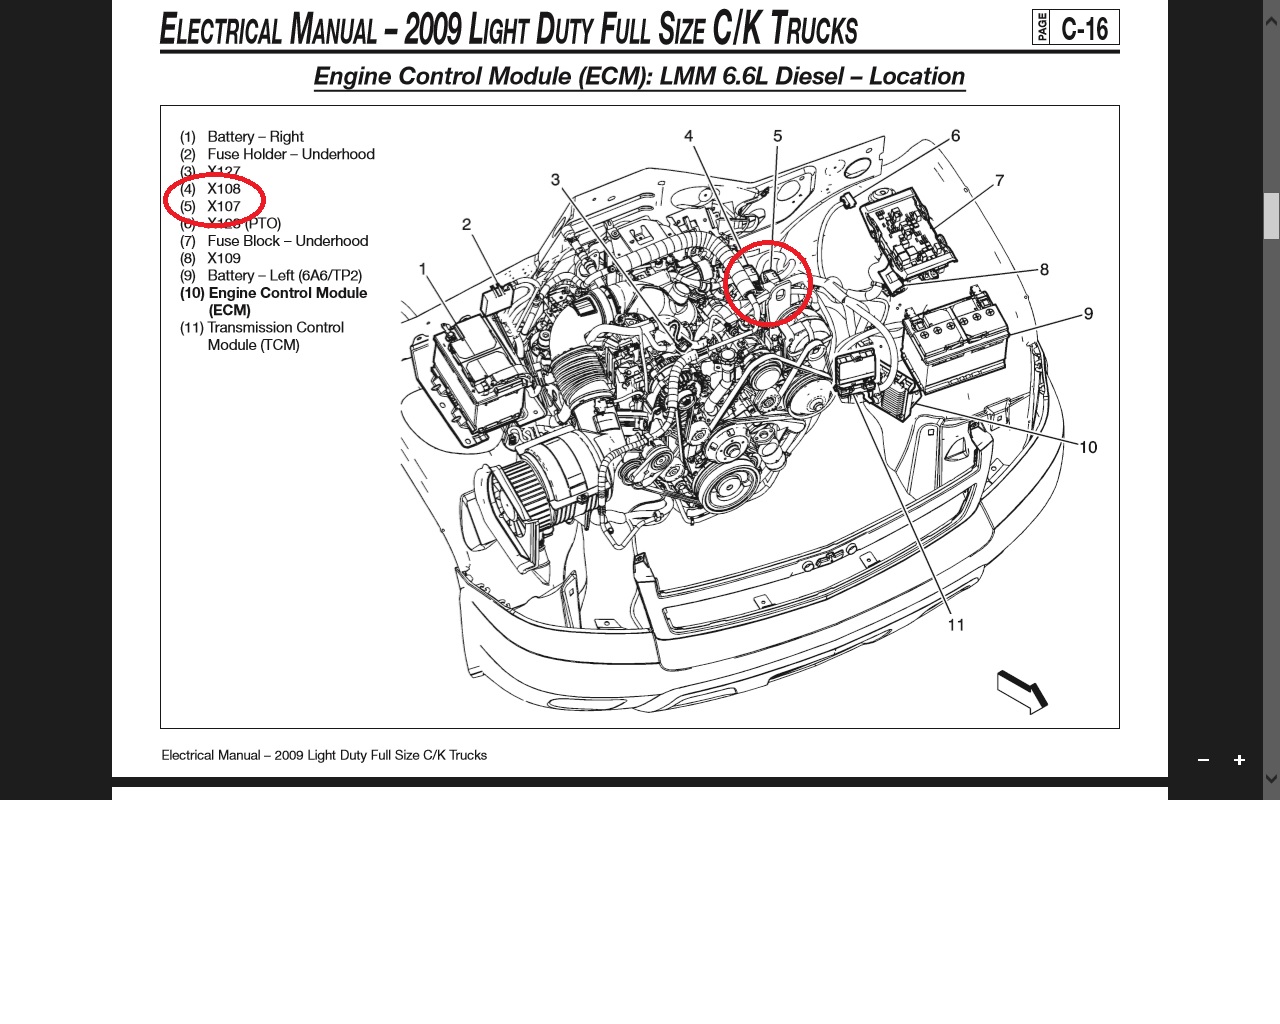 DIY - Duramax Marinisation - Page 18 - Offshoreonly.com lly wiring harness 